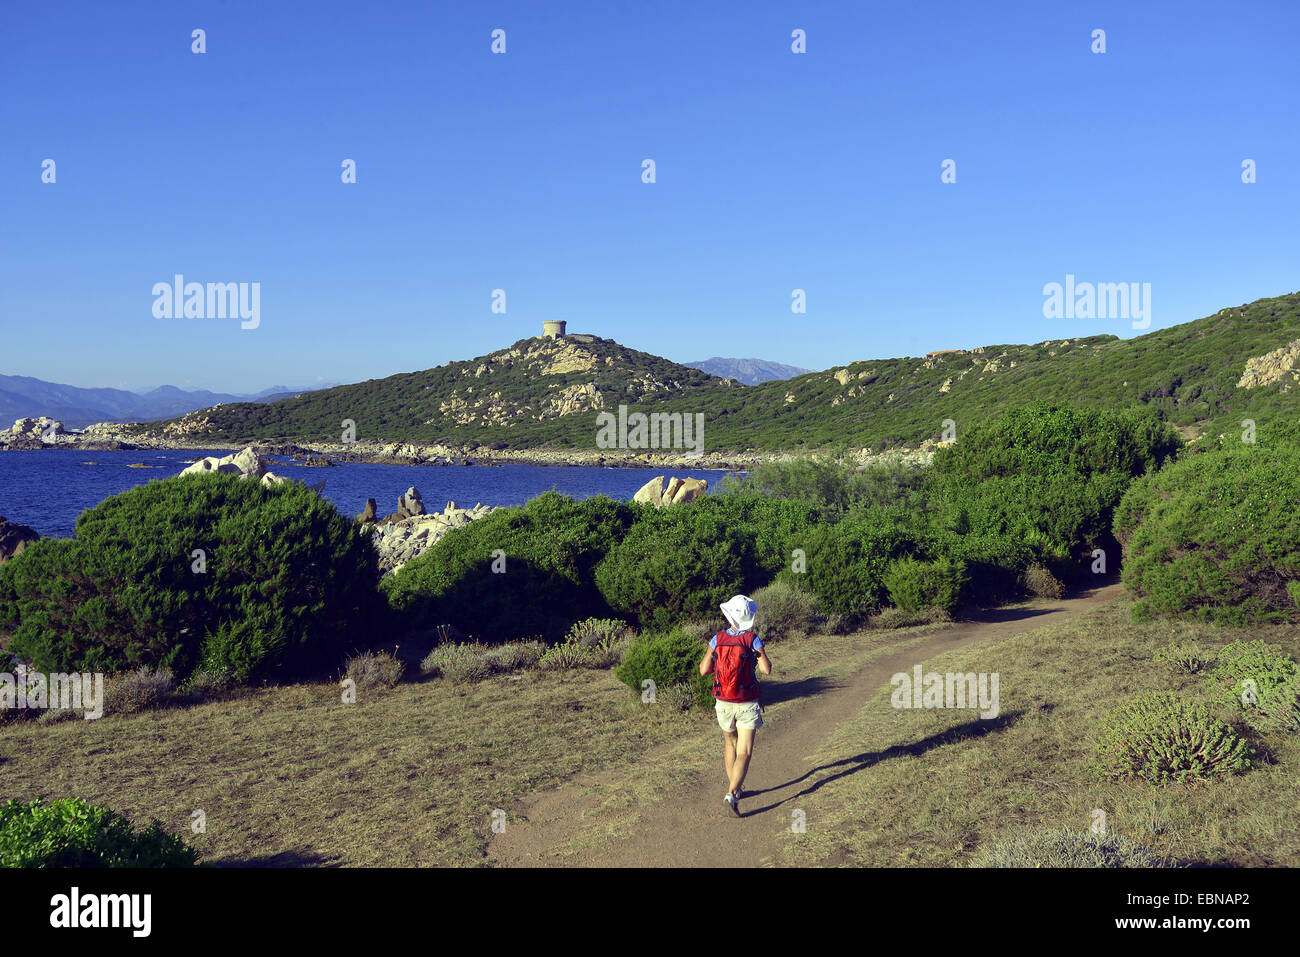 wanderer on path near the coast, Genoese tower in background, France, Corsica, Campomoro, Propriano Stock Photo